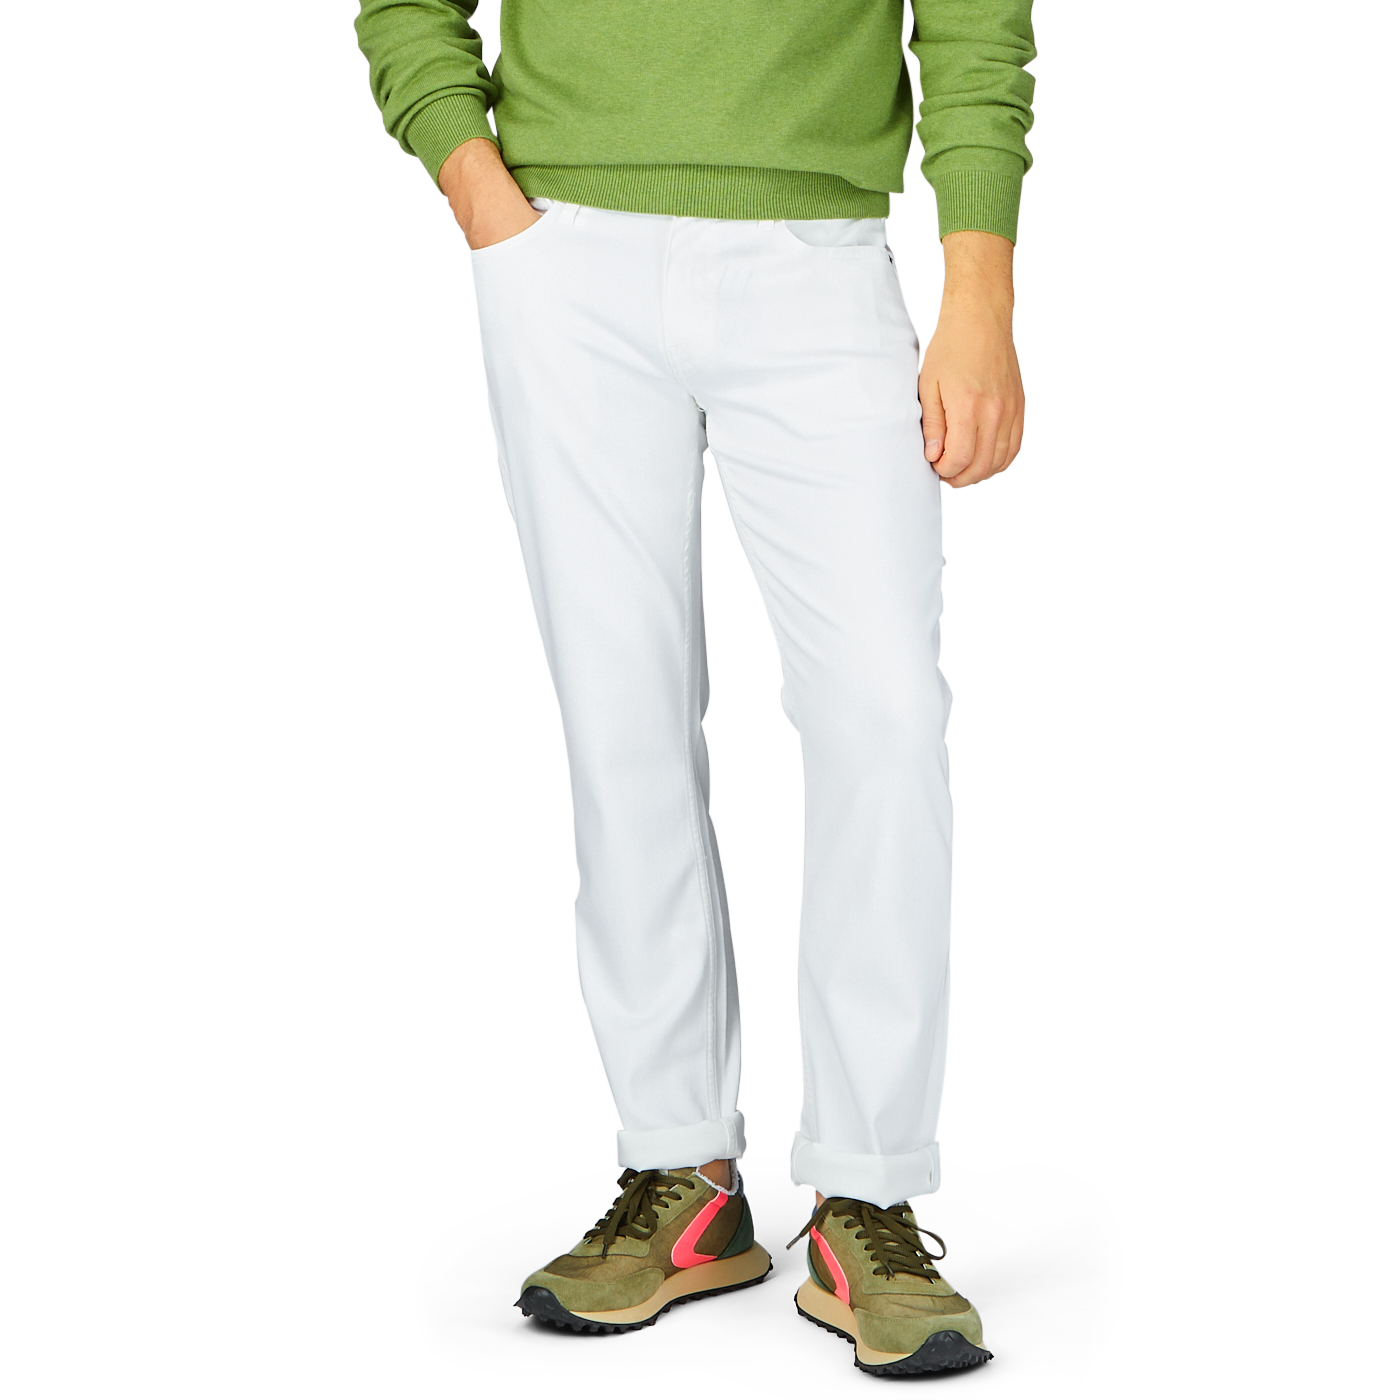 Man in green sweater and Paige Icecap White Cotton Transcend Federal Slim Jeans standing with one hand in pocket, wearing multicolored sneakers.